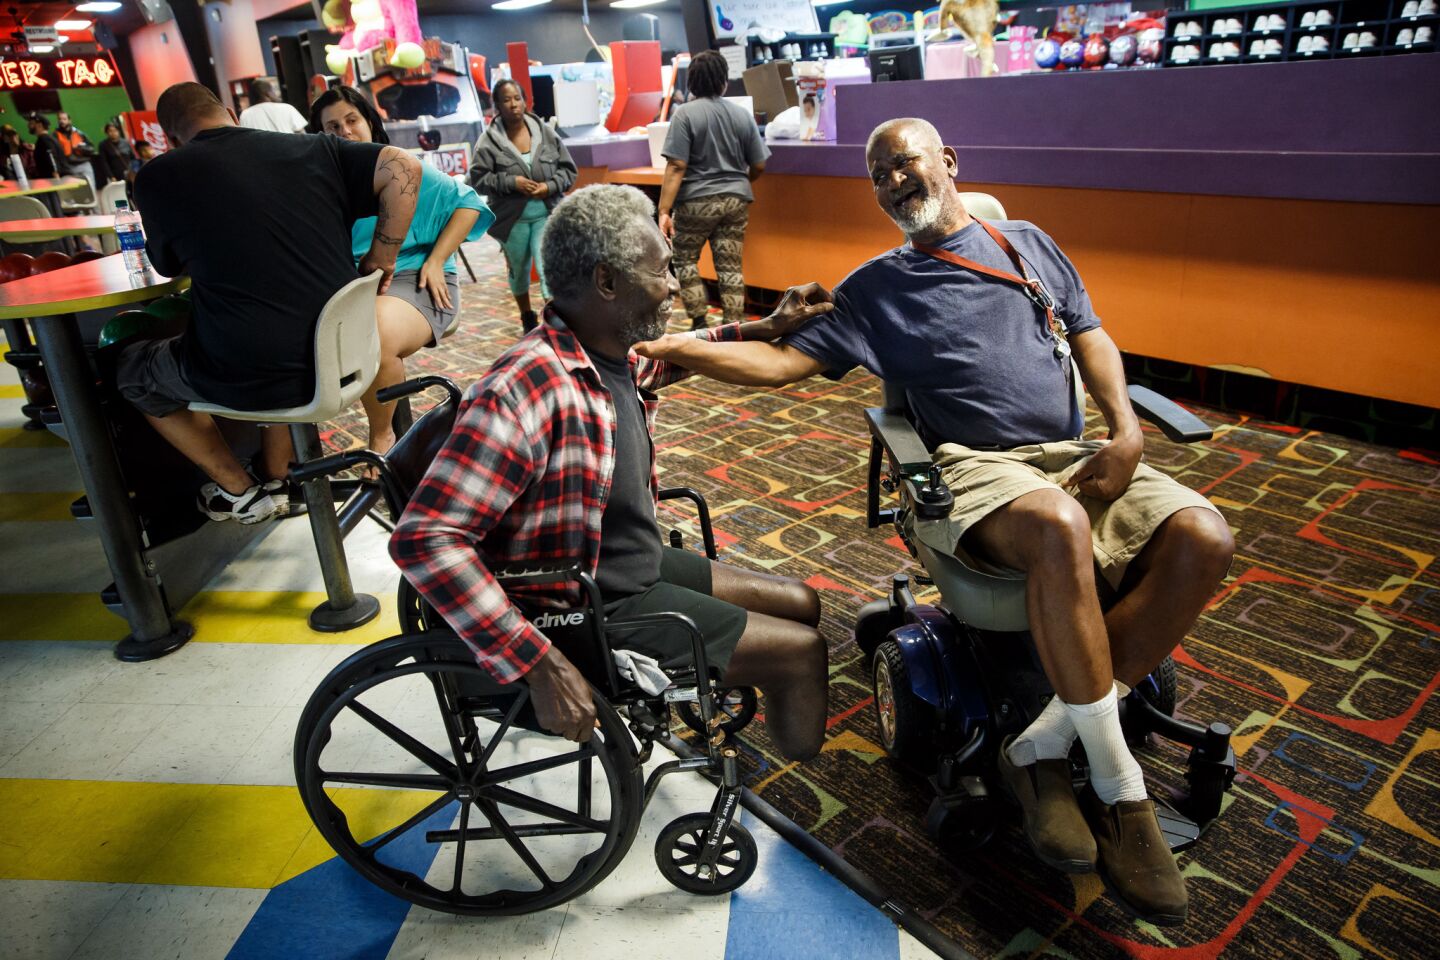 James Benoit, left, and George Clipton sought refuge at Max Bowl in Port Arthur, Texas.